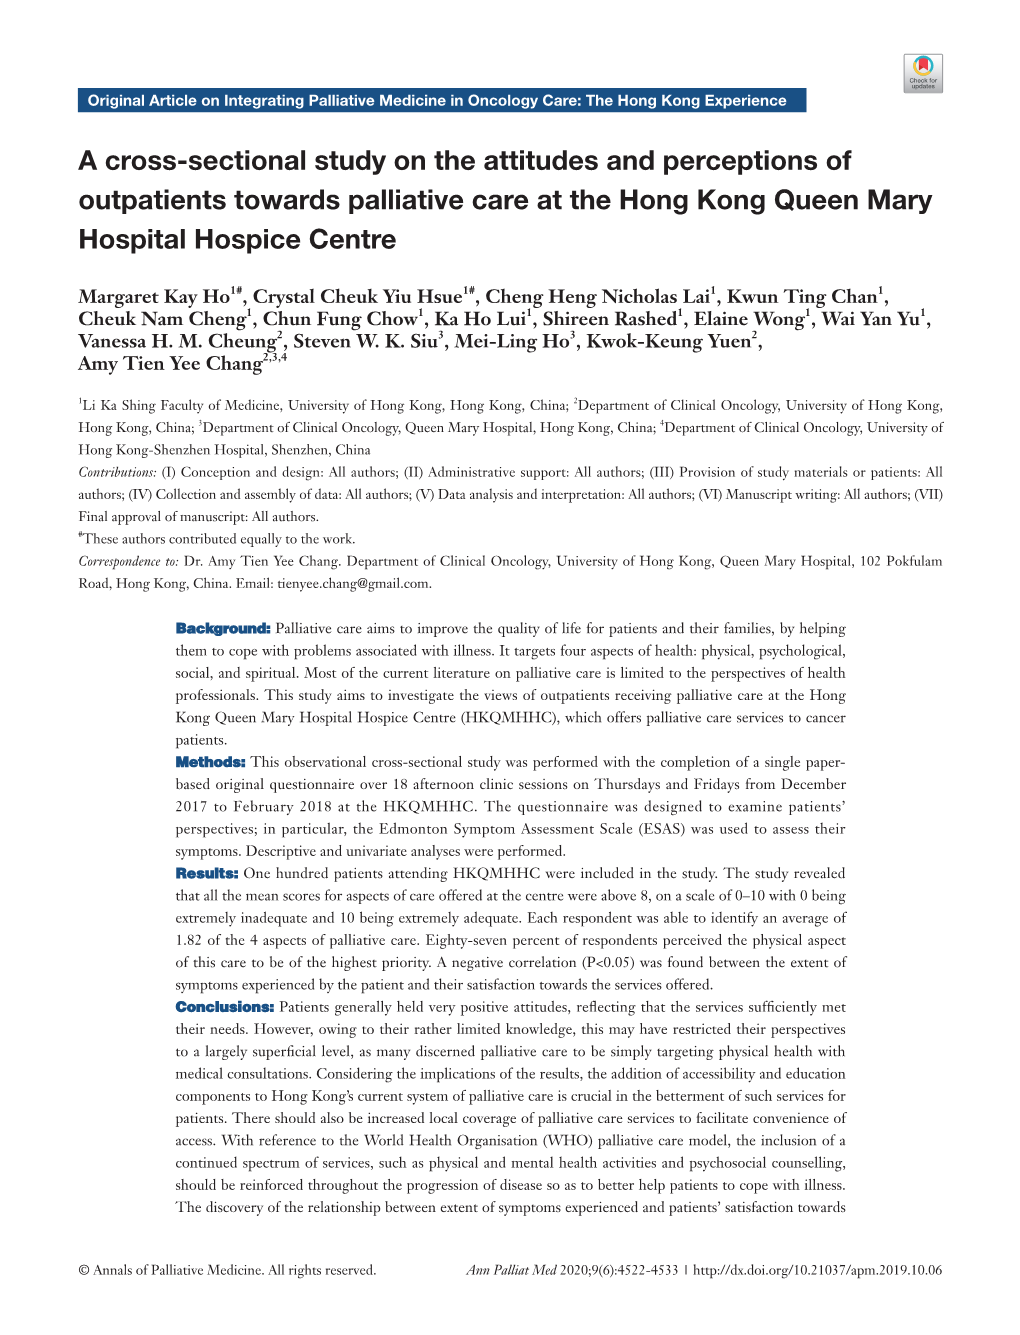 A Cross-Sectional Study on the Attitudes and Perceptions of Outpatients Towards Palliative Care at the Hong Kong Queen Mary Hospital Hospice Centre